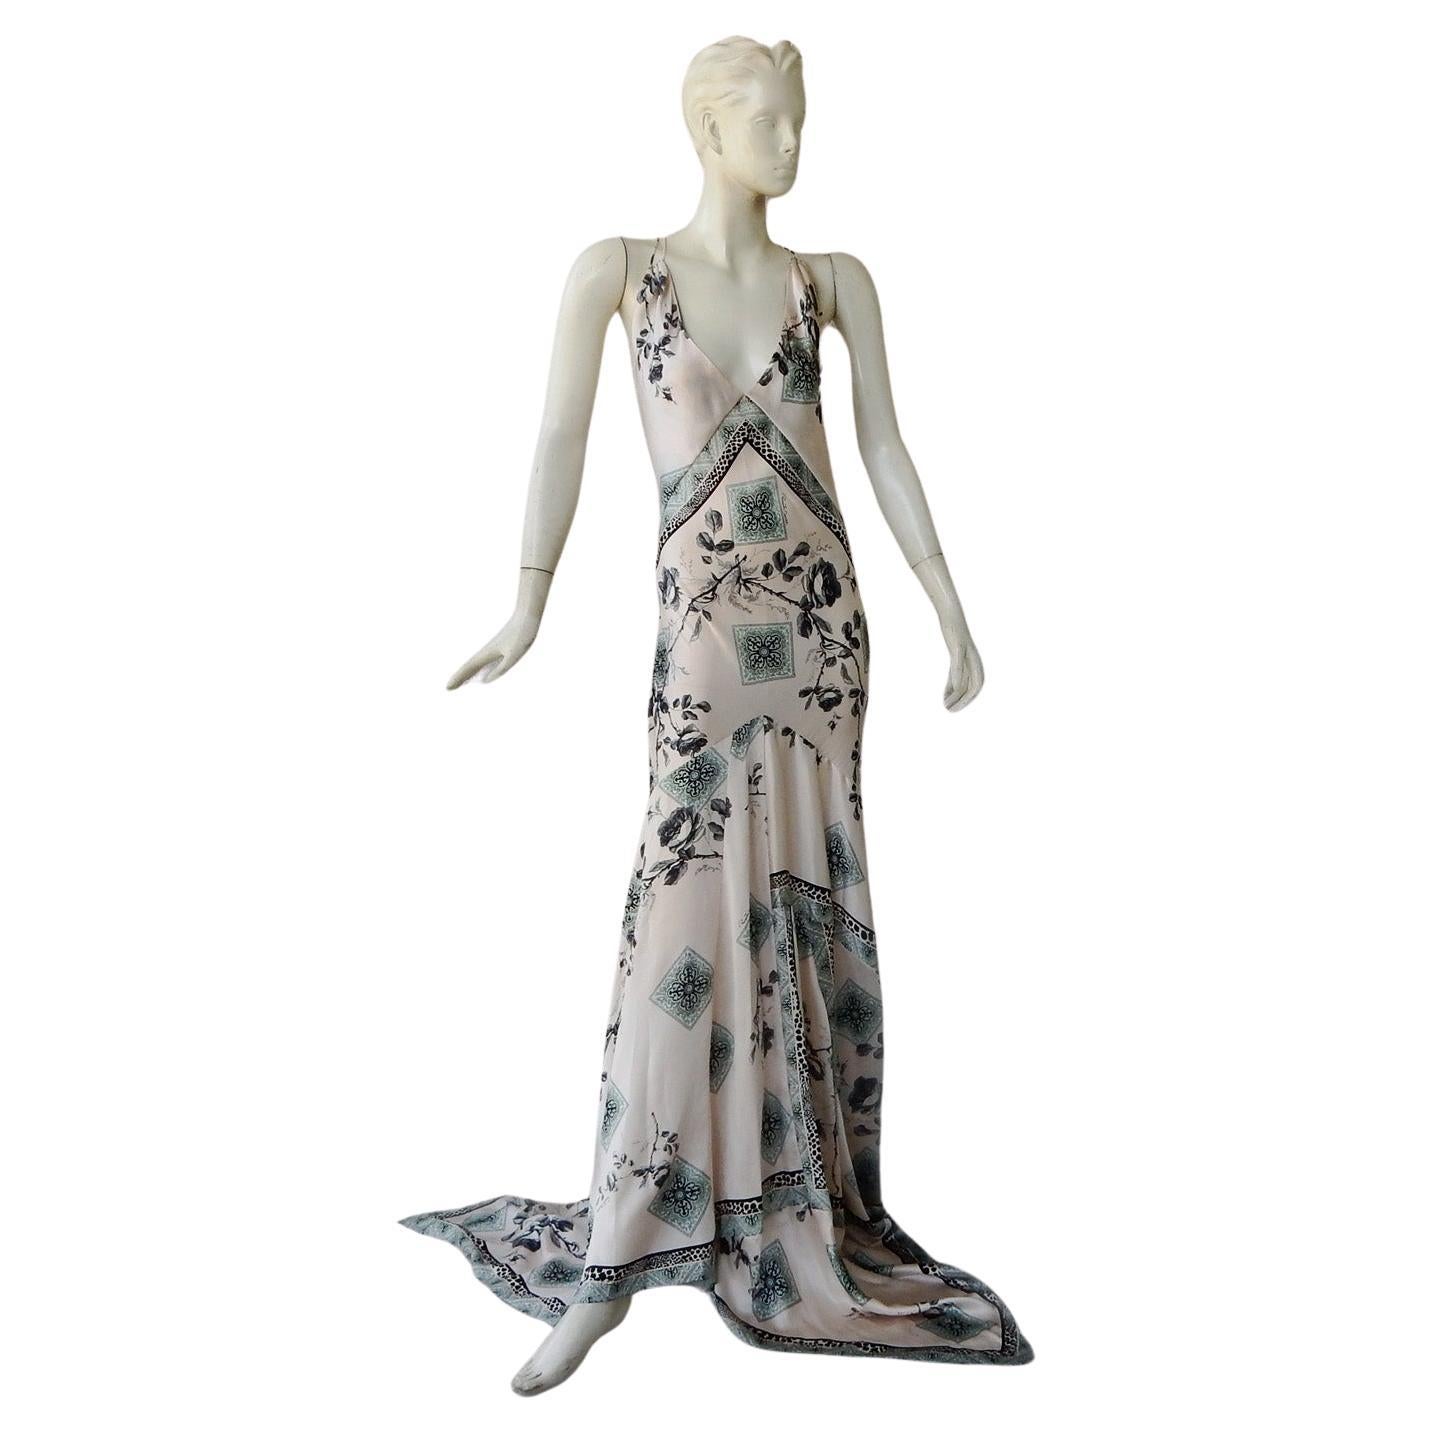 Roberto Cavalli Rare Vintage Asian Inspired Gown For Sale